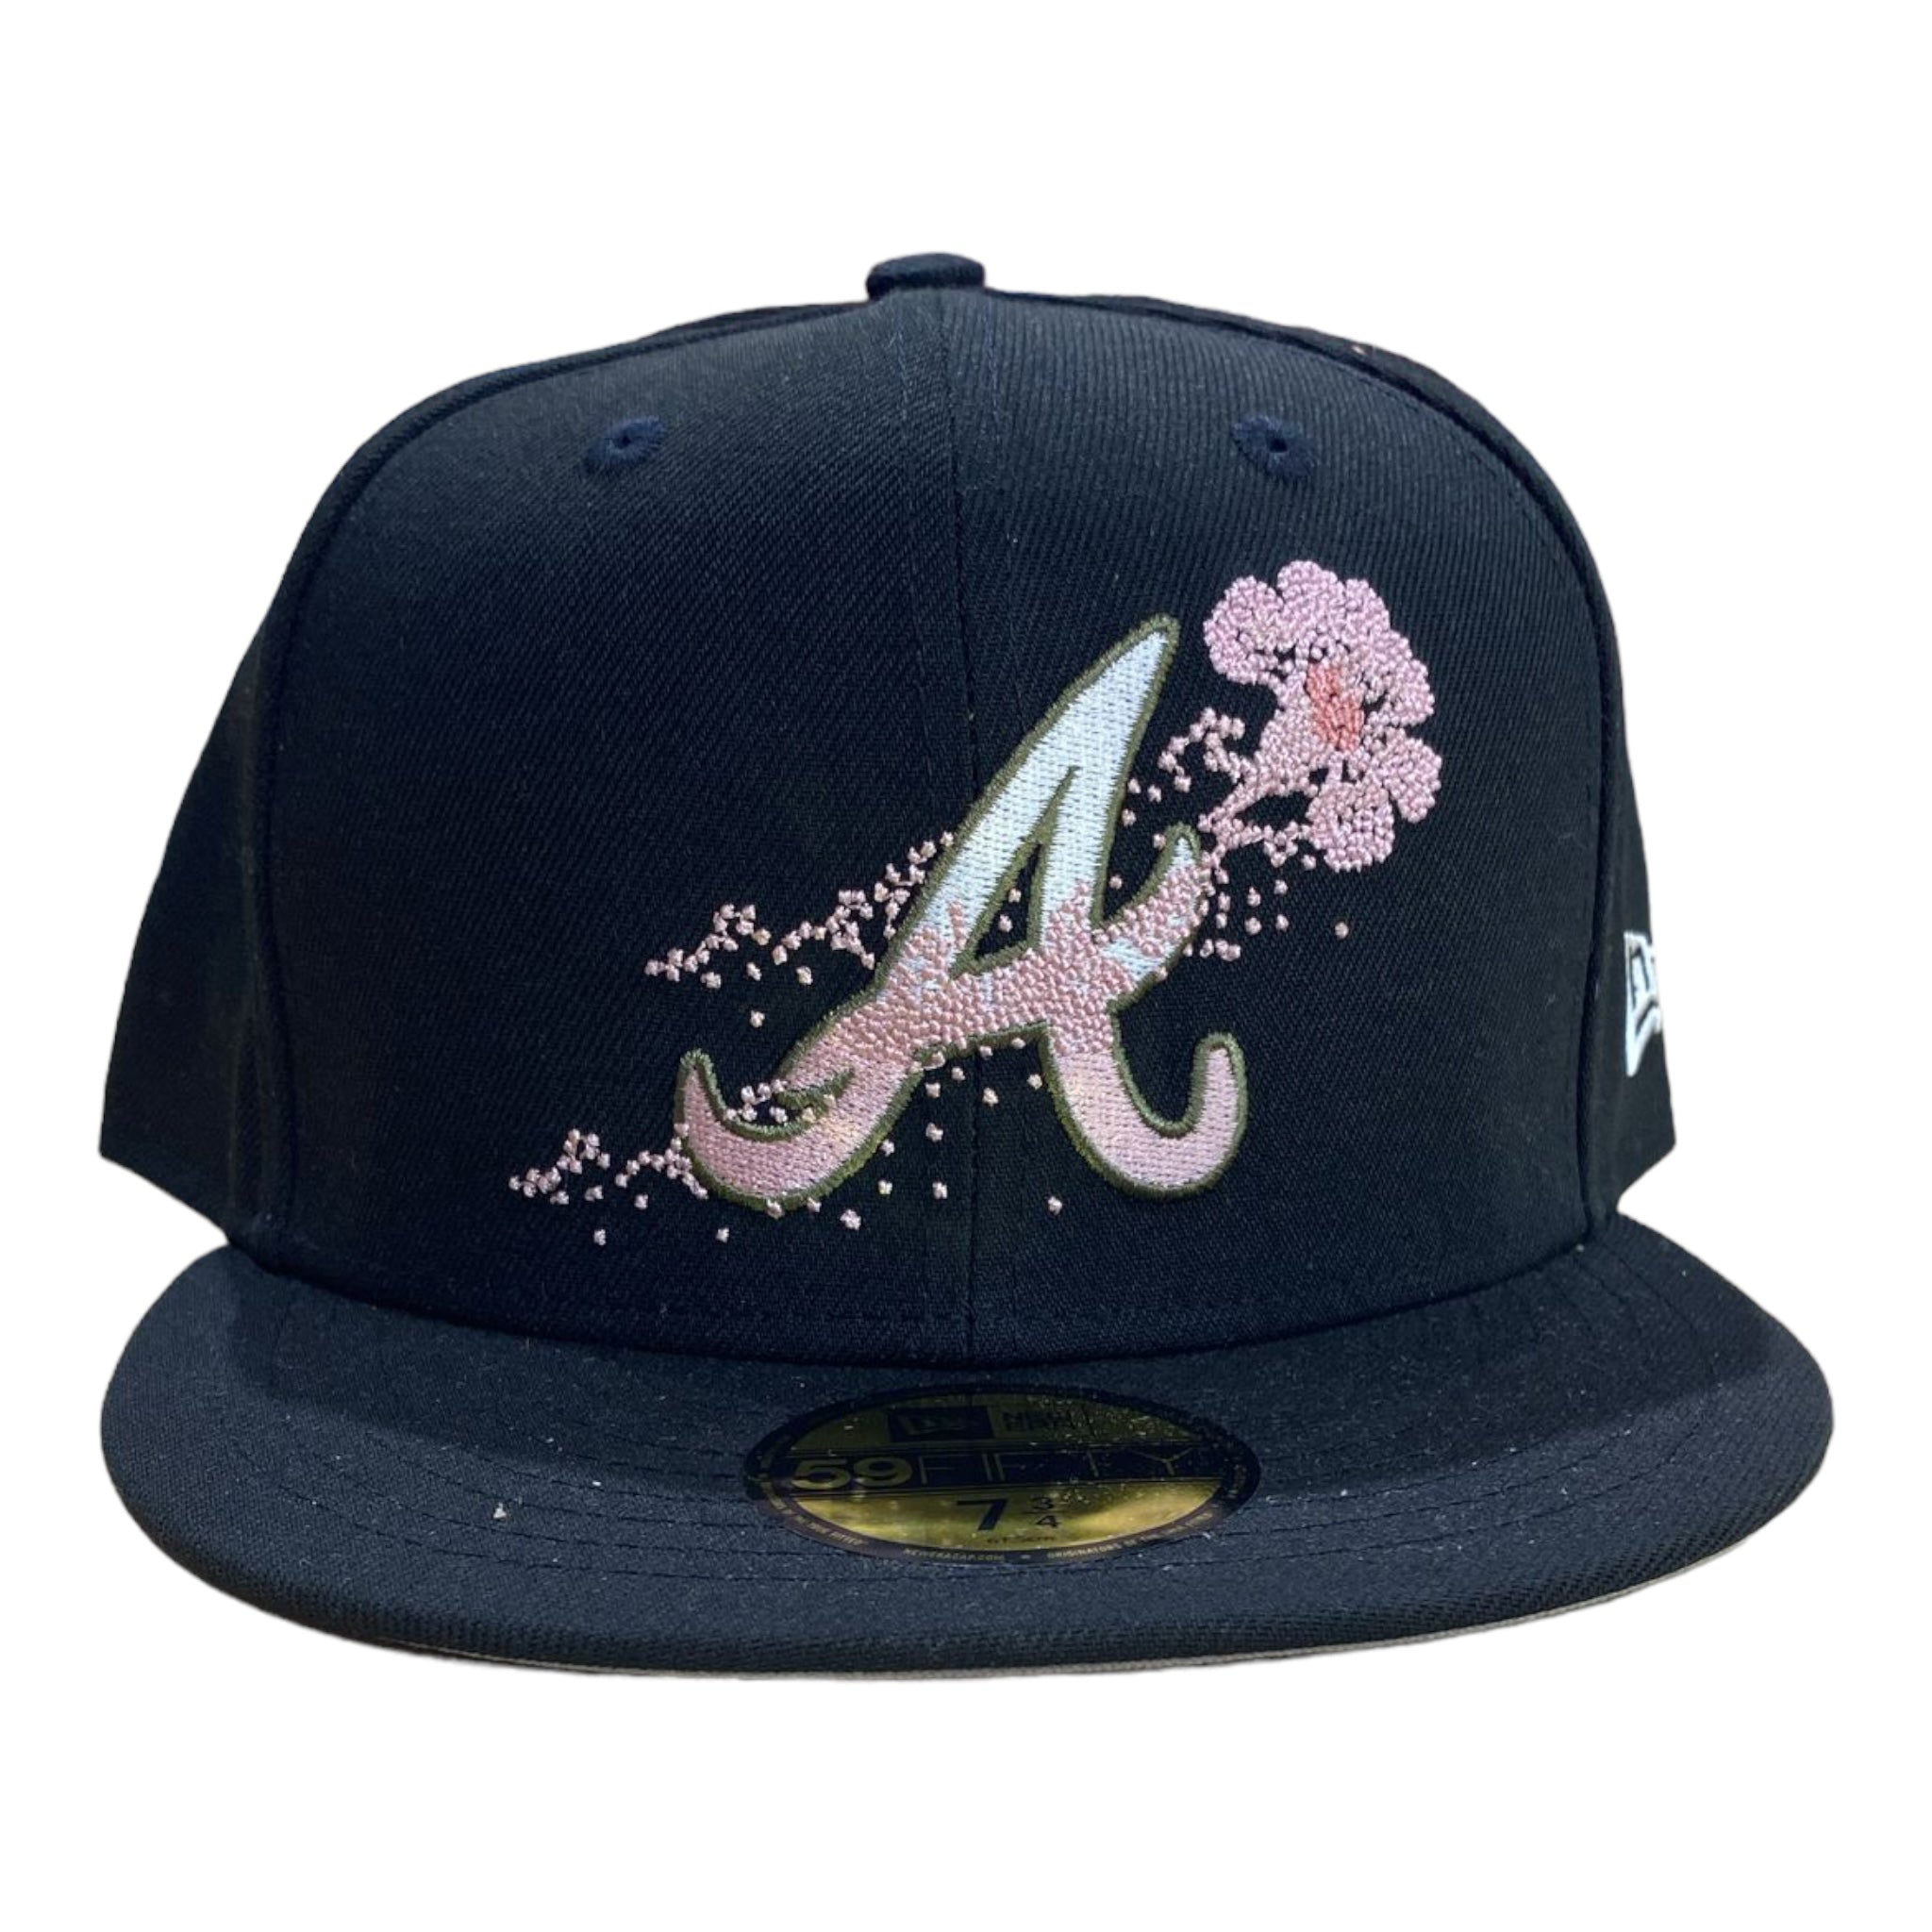 NEW ERA: Braves Dotted Floral Fitted 60505263